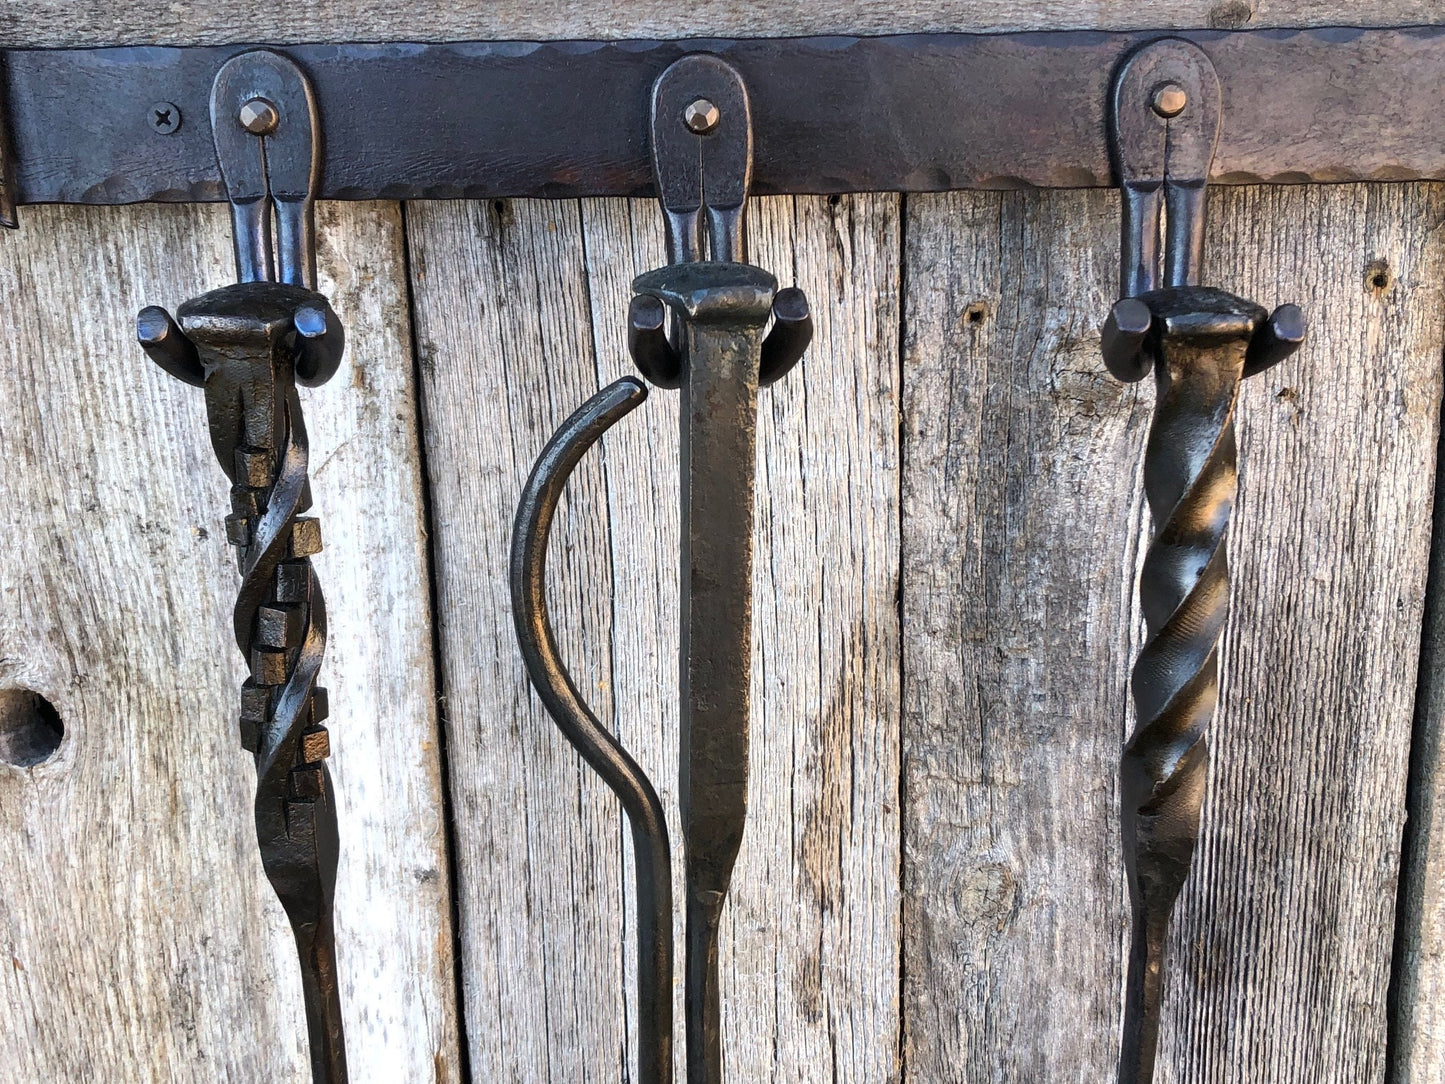 Metal Rack Hand Forged - Fireplace Tool Hanger - Kitchen  - Hooks - Hand Forged - Wall Mounted Hooks - Handmade In USA